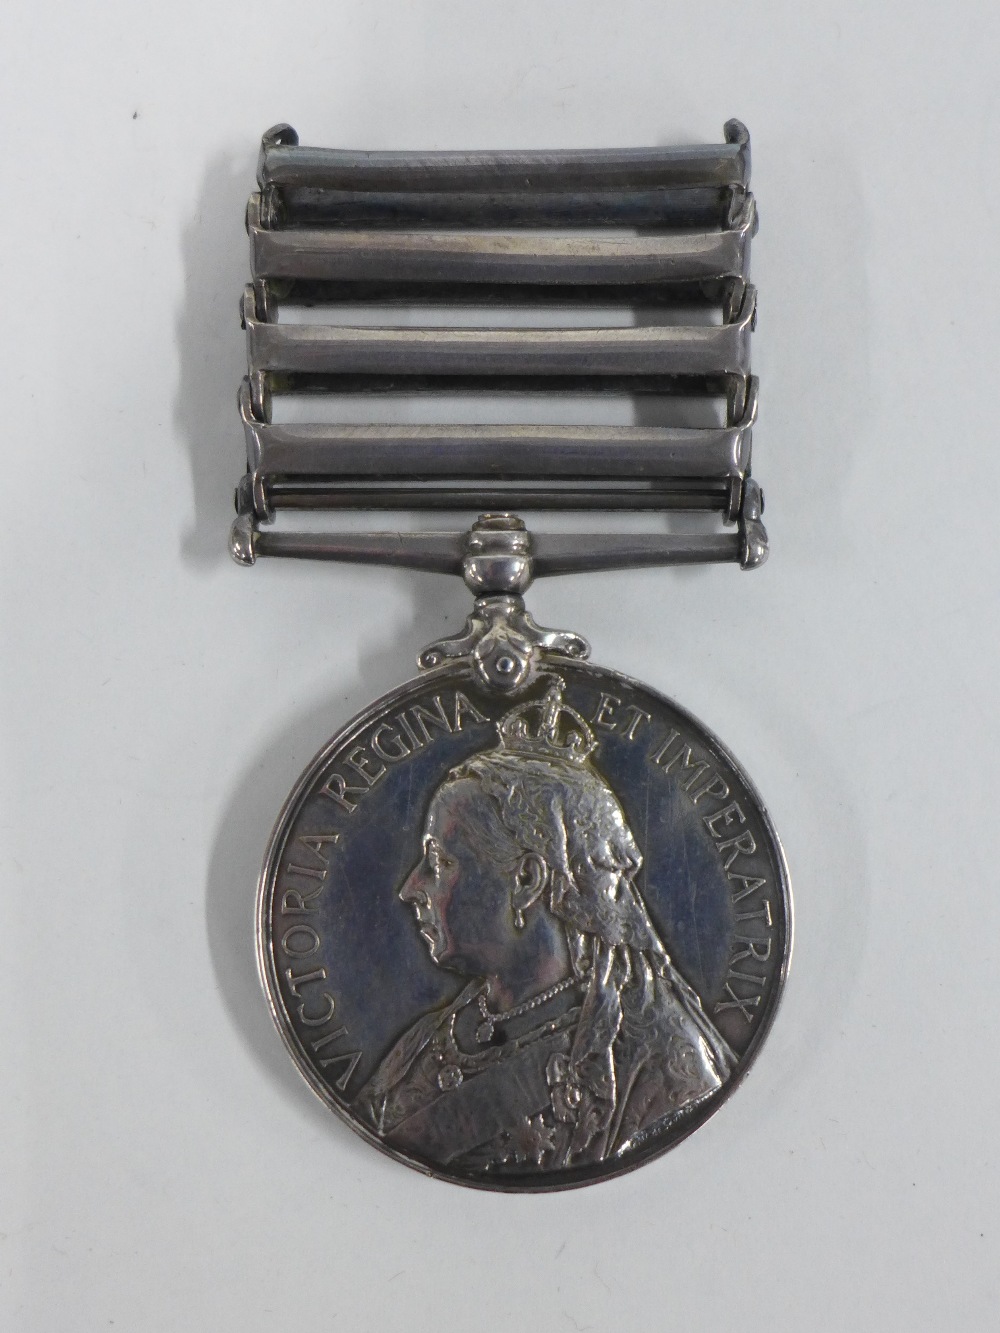 Queen Victoria South Africa medal awarded to 5814 Pte A Mitchell, RL Highlanders, with Transvaal, - Image 3 of 5